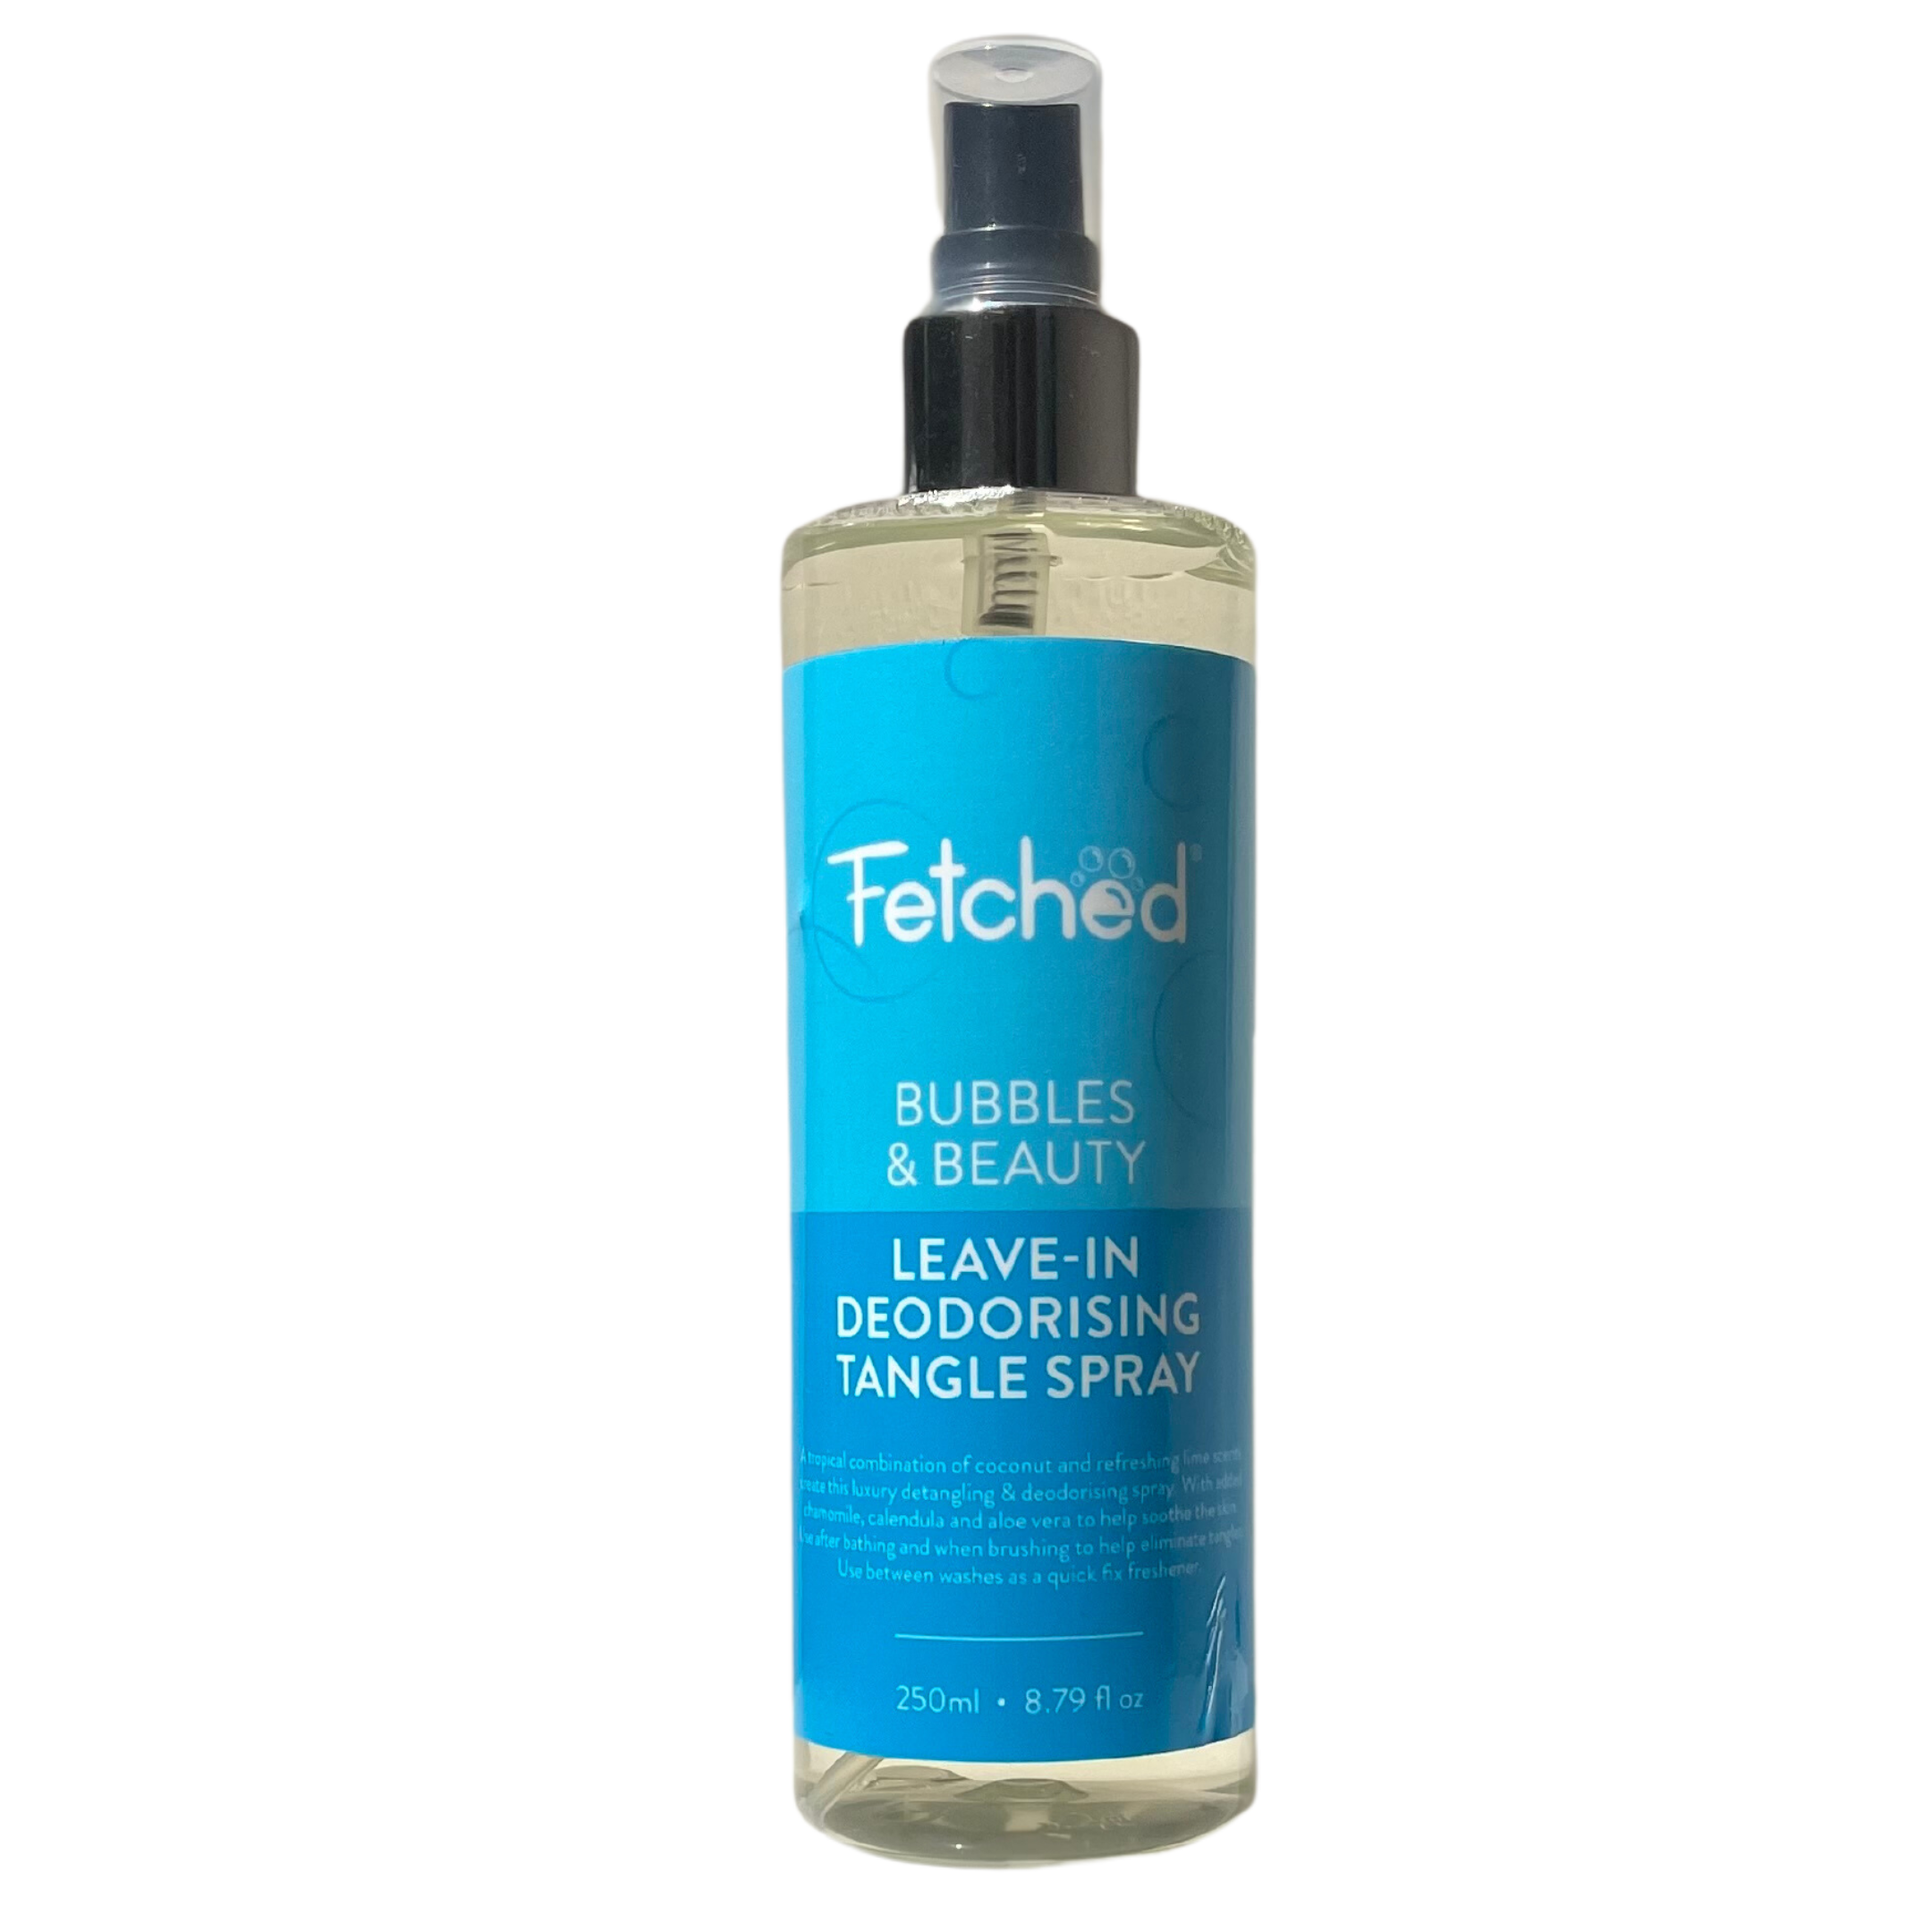 Leave in deodorising tangle spray for dogs